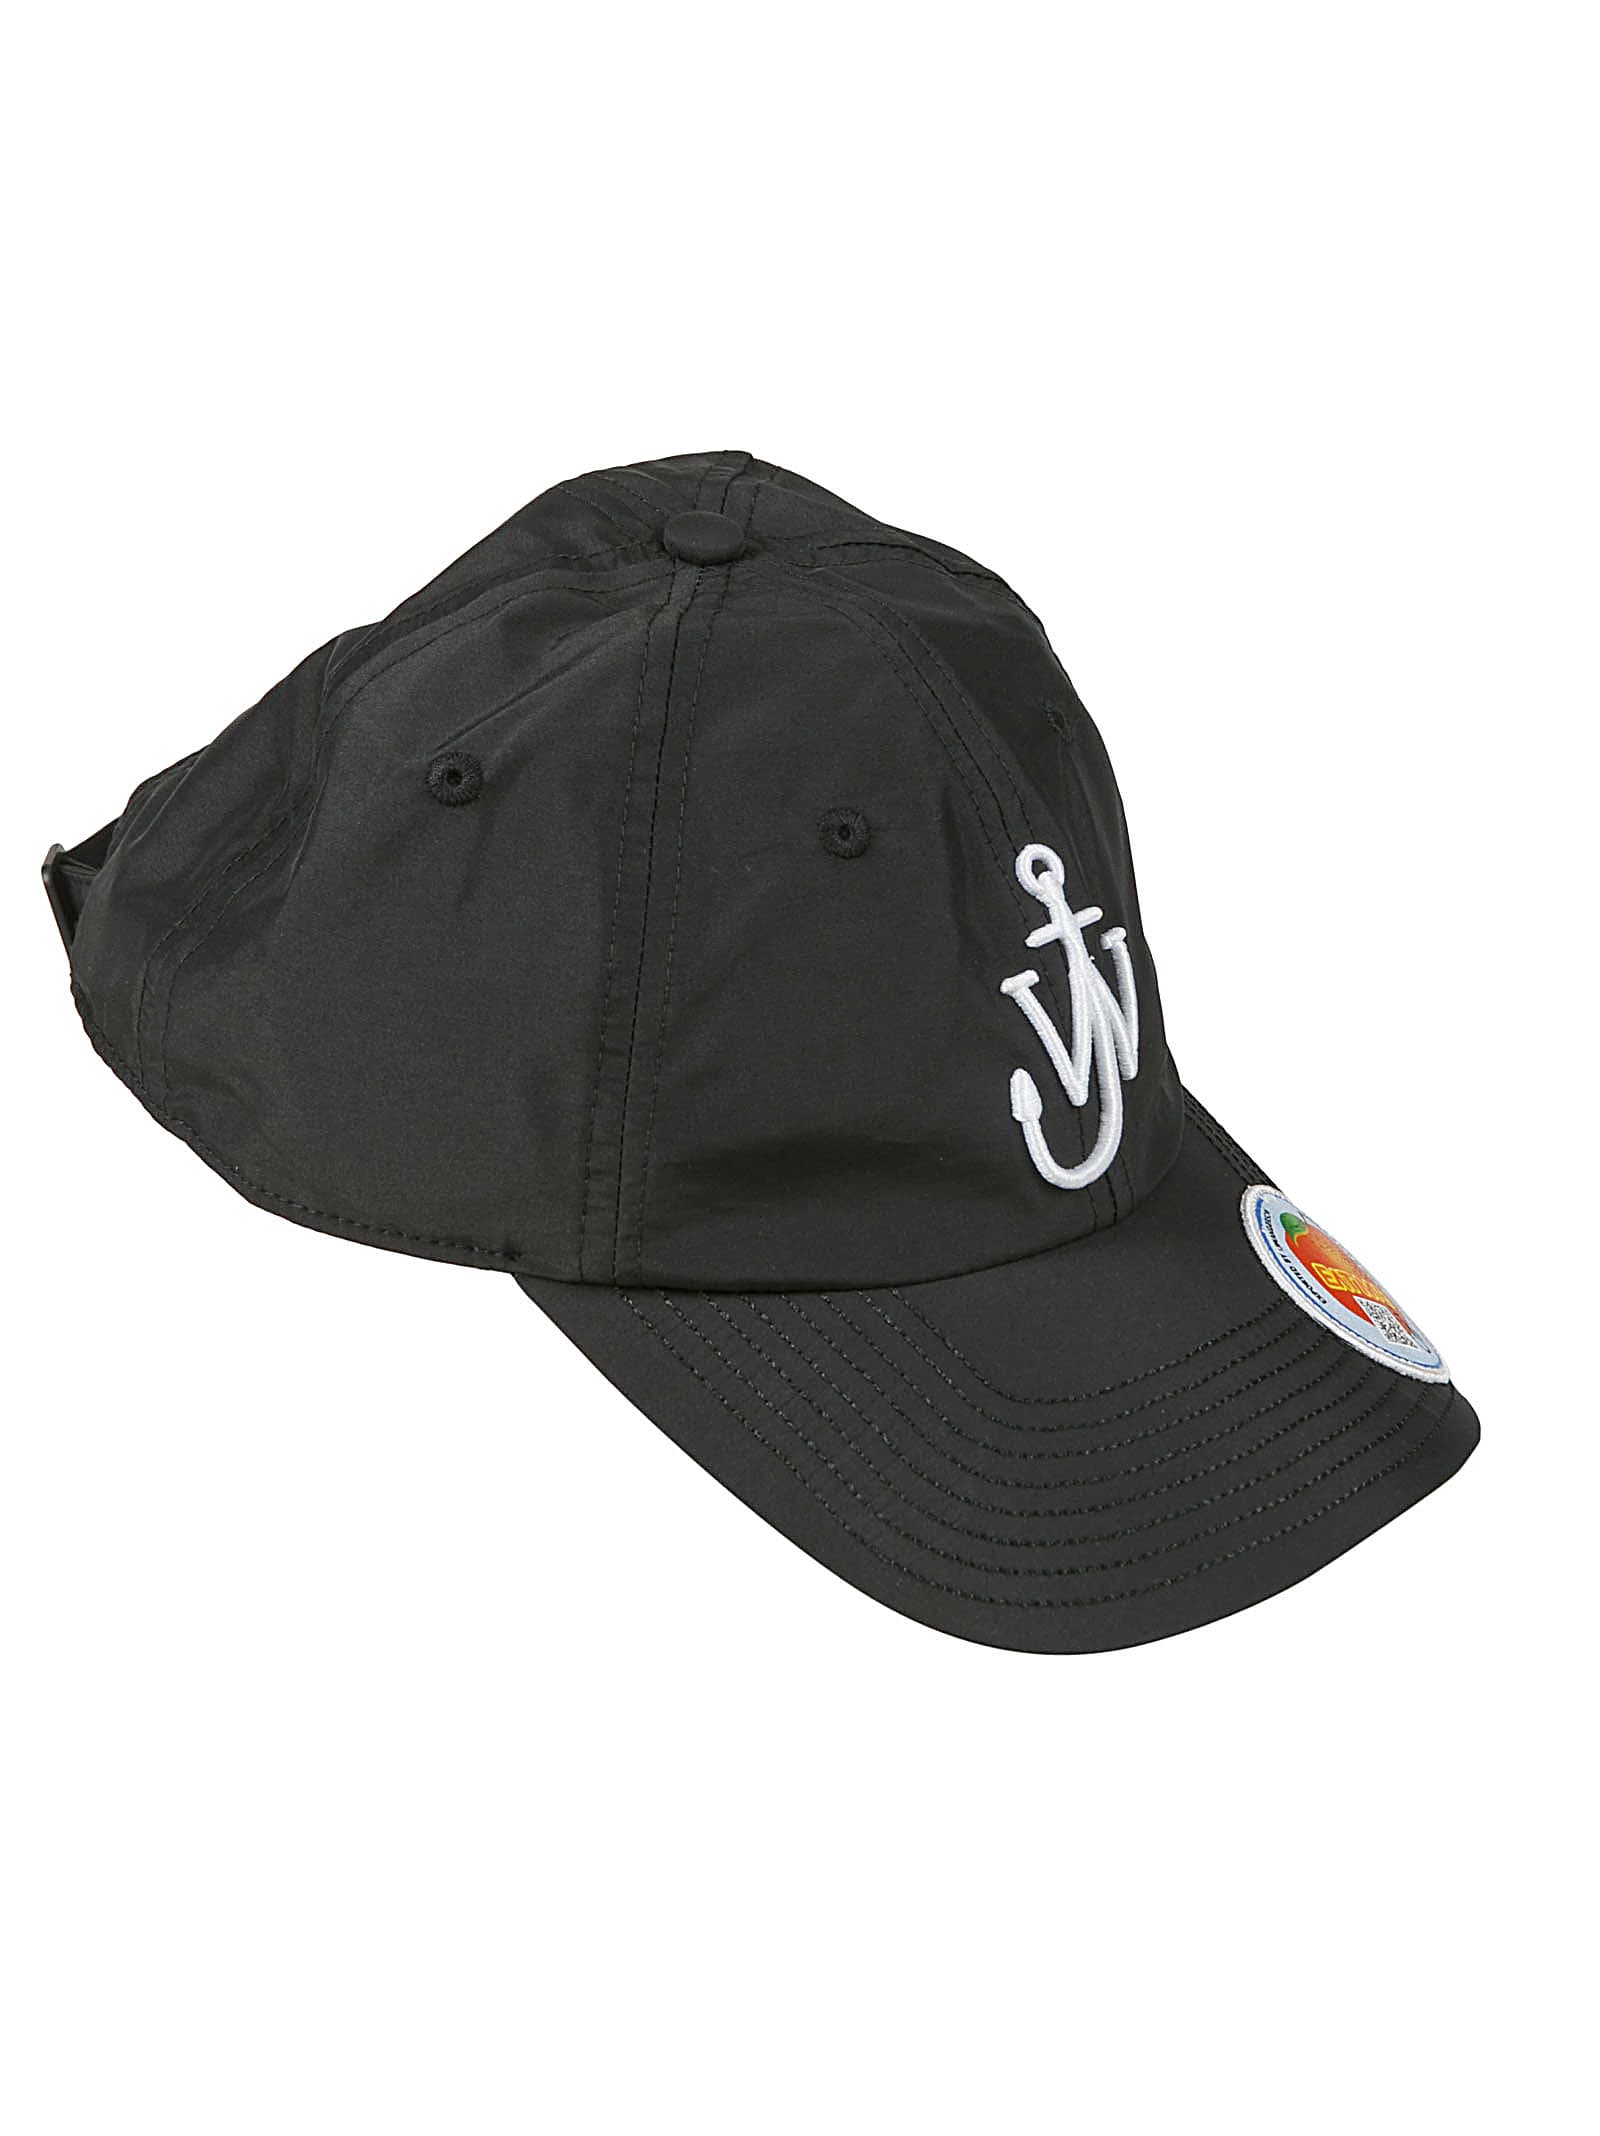 JW ANDERSON LOGO EMBROIDERED BASEBALL CAP